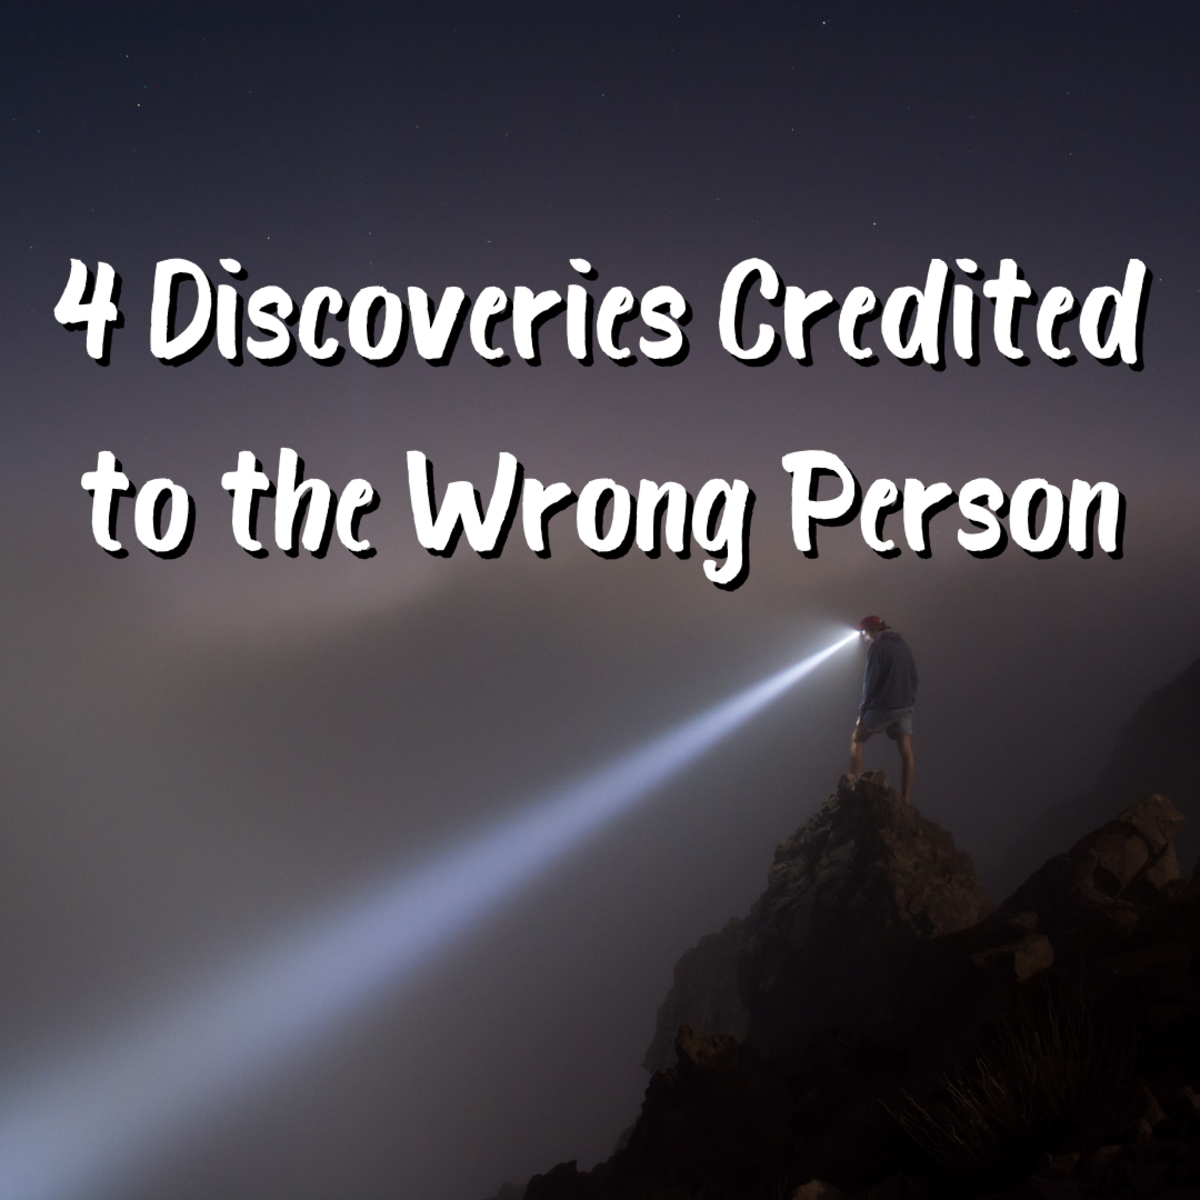 Sometimes people don't get the credit they deserve. Read on to learn all about 4 amazing discoveries that were attributed to the wrong person, from Halley's Comet to the discovery of modern-day El Salvador.